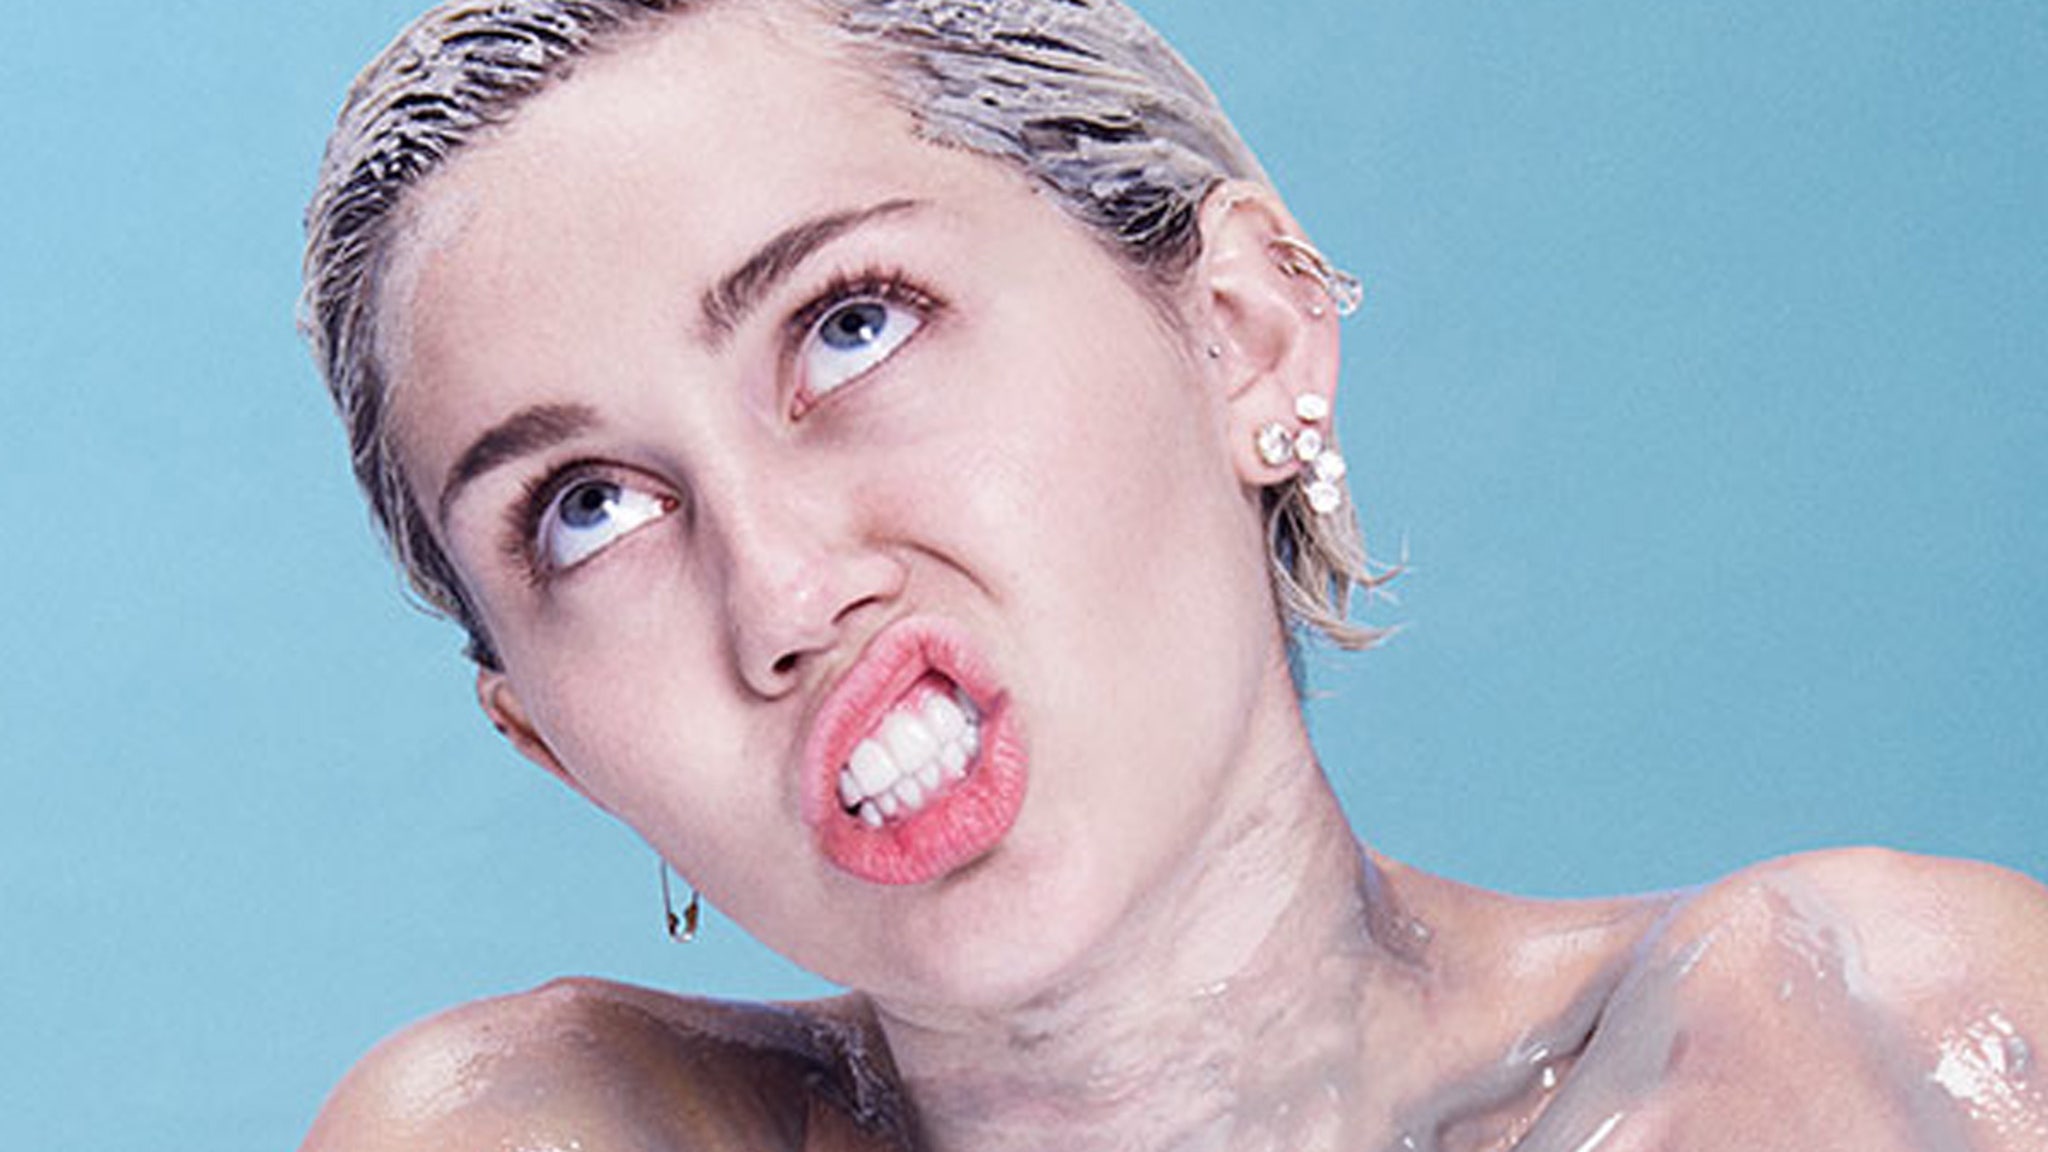 Miley Cyrus Gets Totally Naked In Paper Magazine, Says She's Had Serio...